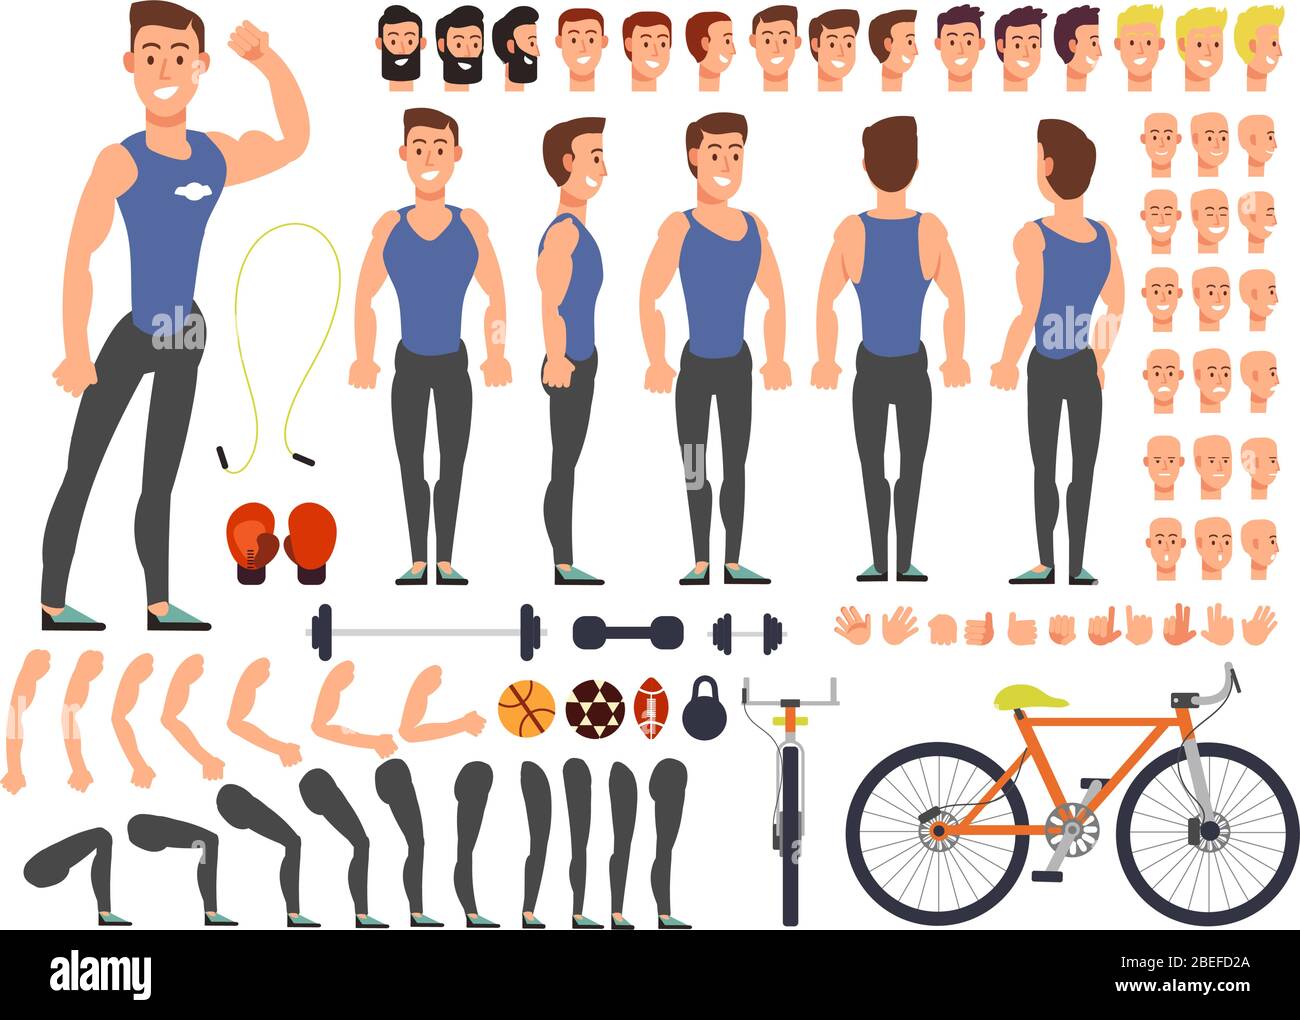 Cartoon man athlete vector character constructor with set of body parts and sports equipment. Character man with sport, equipment illustration Stock Vector